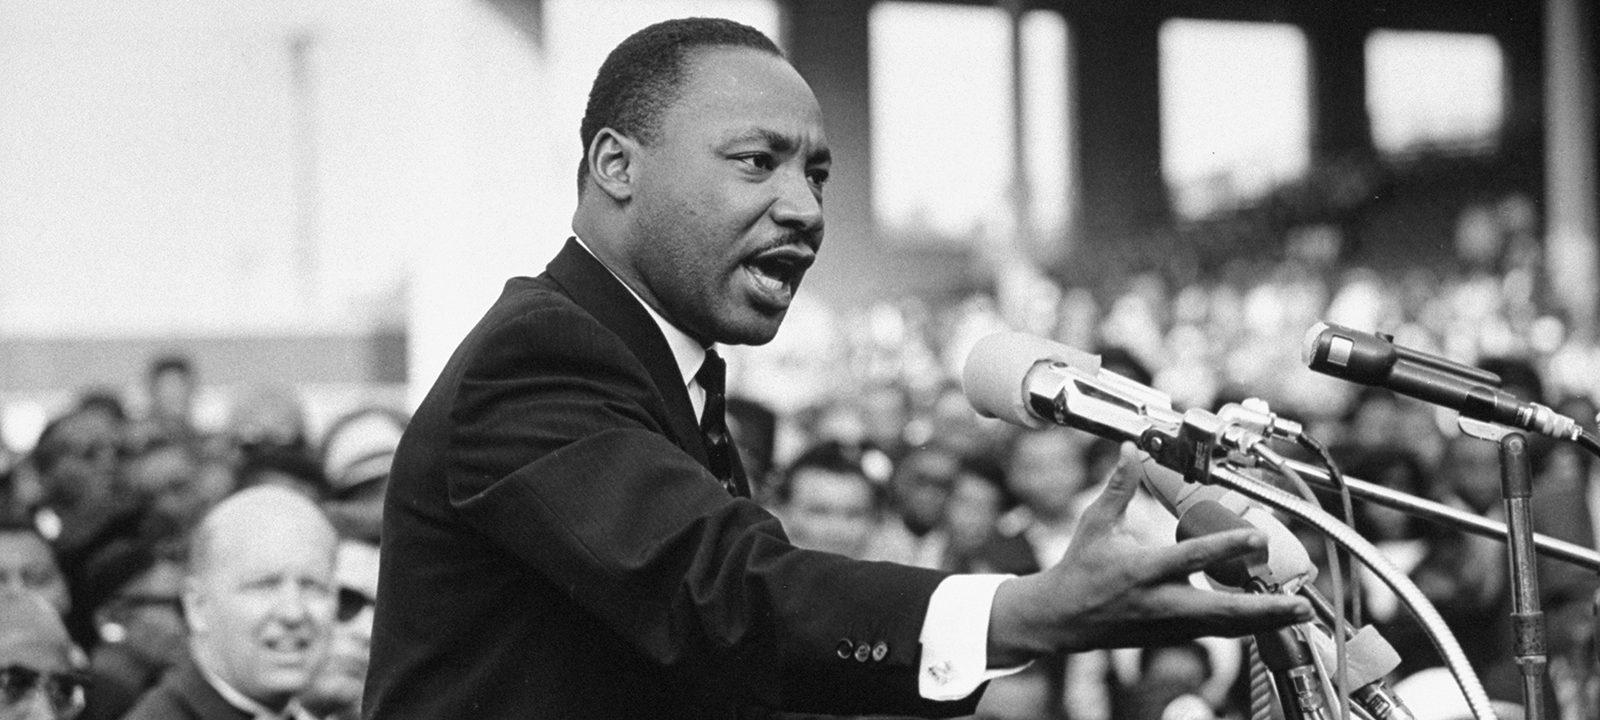 Martin luther king speaking passionately in large gathering